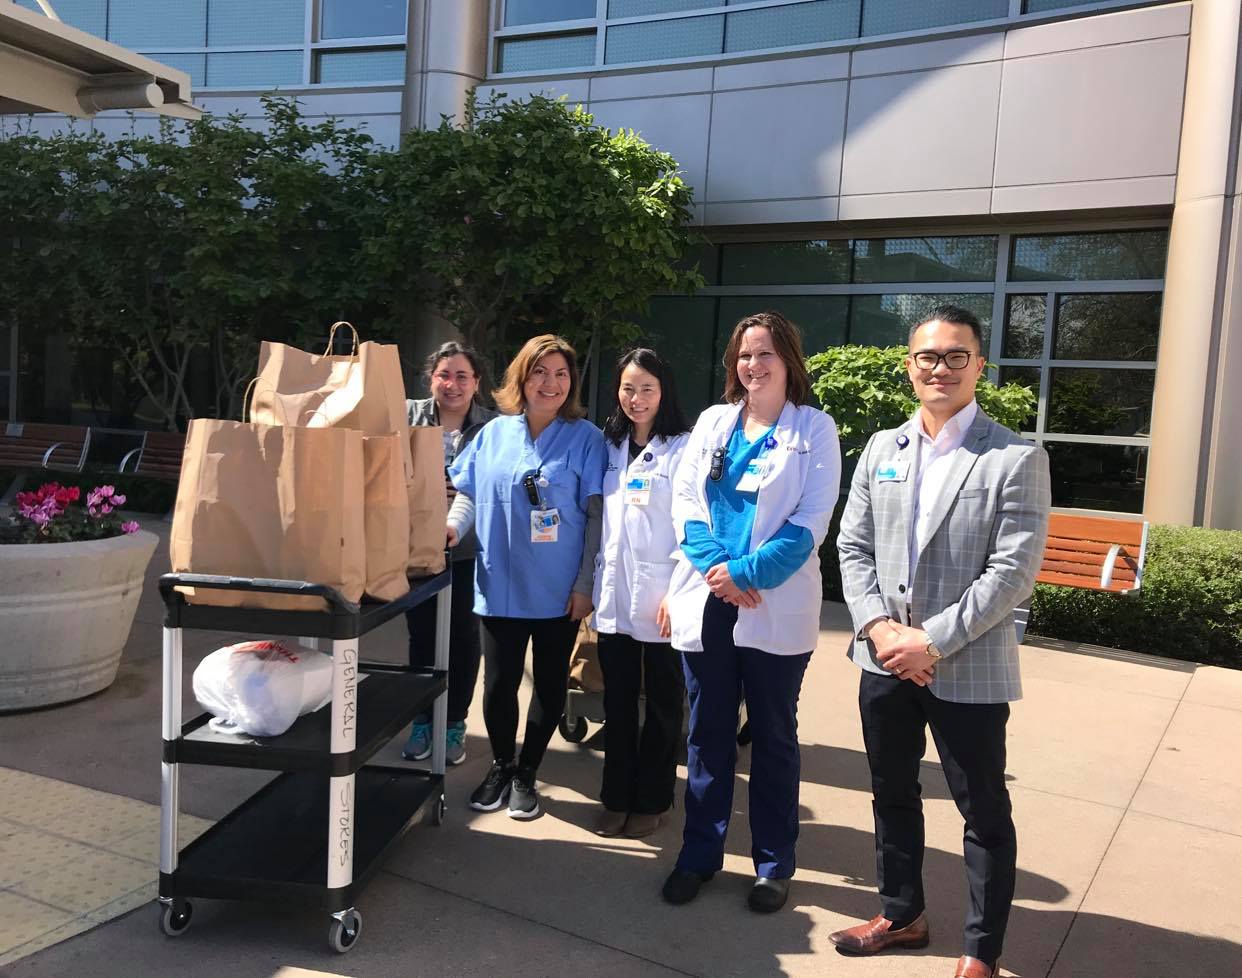 Medical staff at El Camino Hospital Mountain receive Vietnamese meals from Pho Ha Noi restaurant in this photo supplied by Phan Tieu Van.